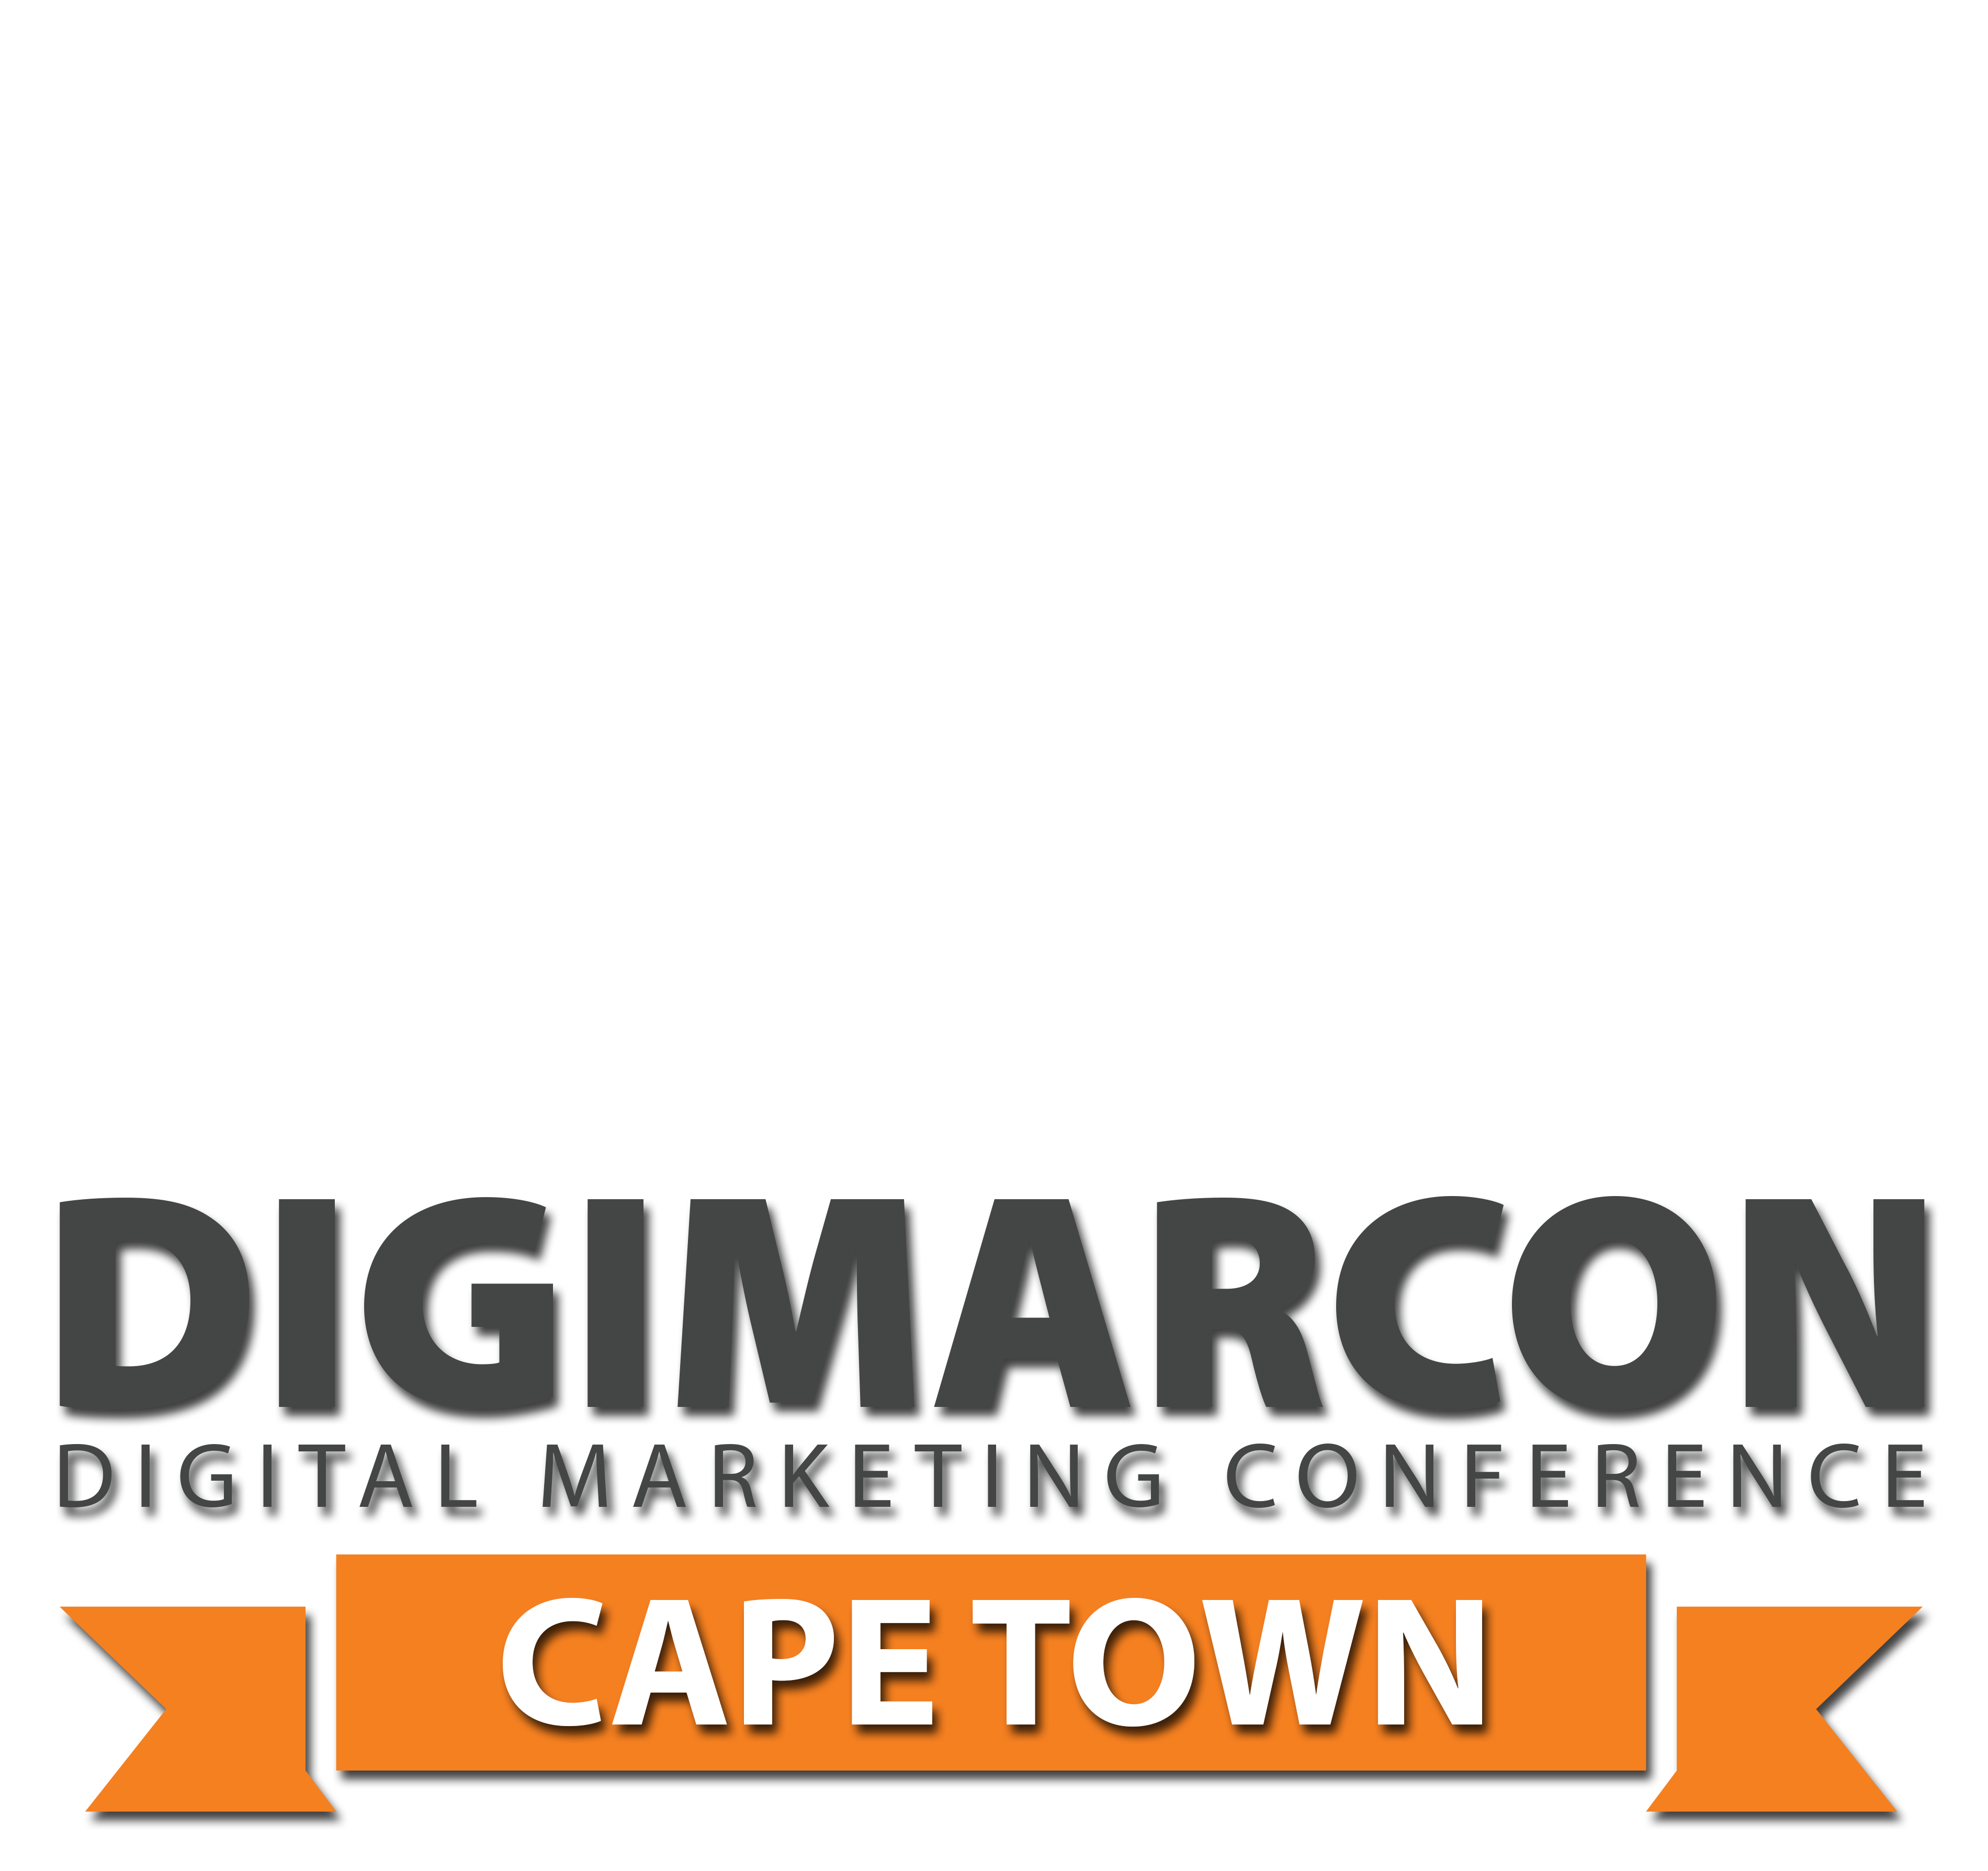 DigiMarCon South Africa – Digital Marketing, Media and Advertising Conference & Exhibition